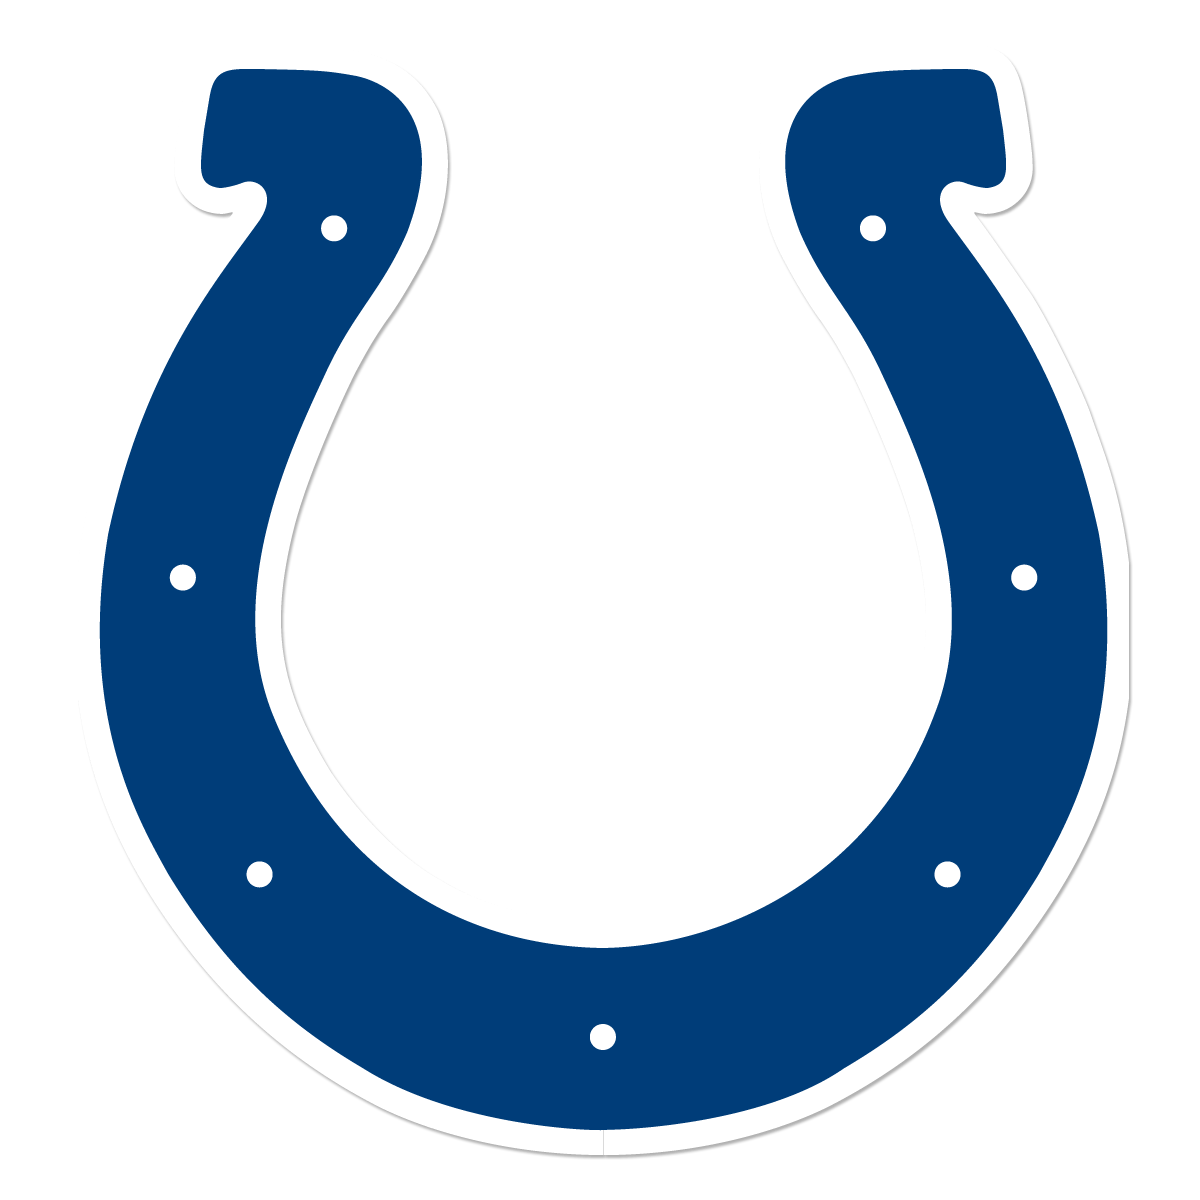 Colts Football Logo - Indianapolis Colts Logo, Colts Symbol Meaning, History and Evolution